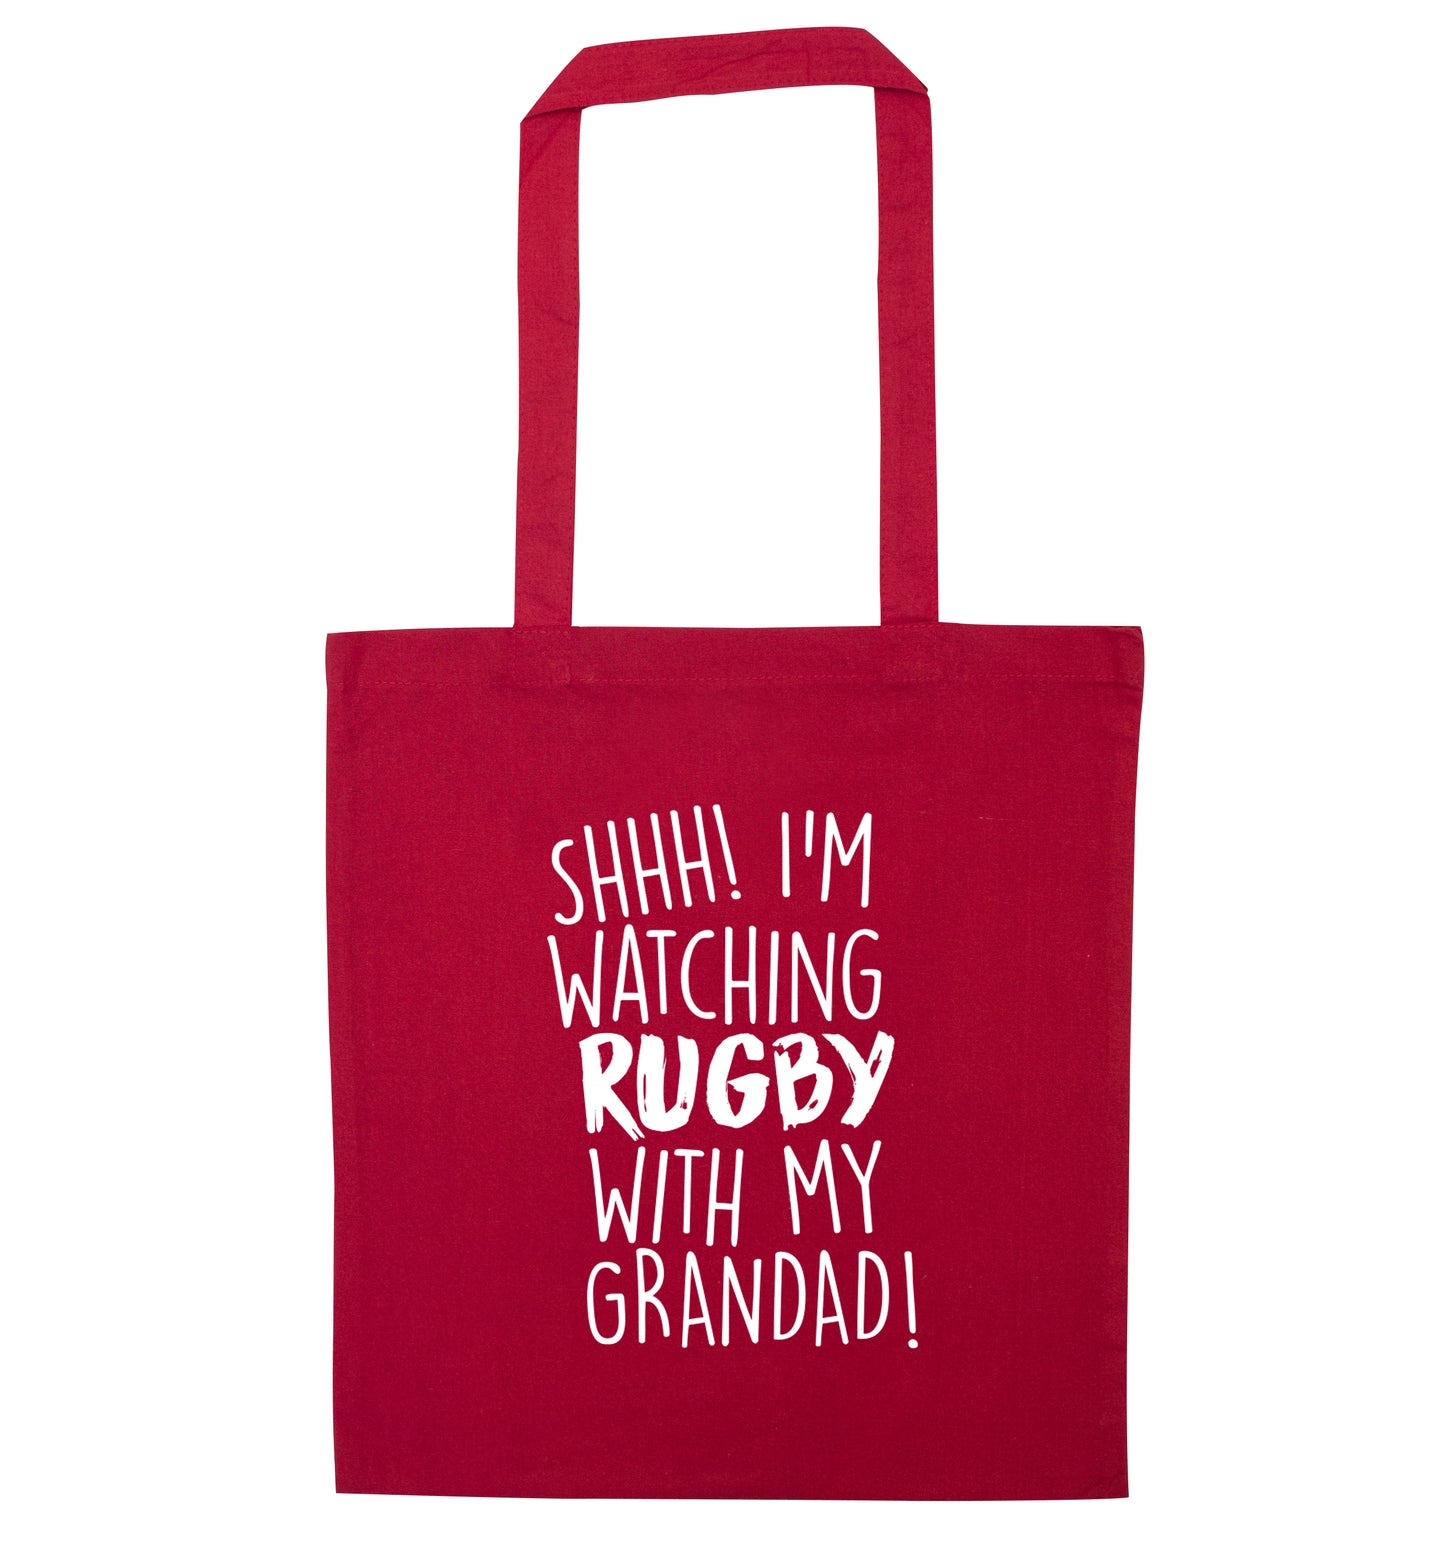 Shh I'm watching rugby with my grandaughter red tote bag